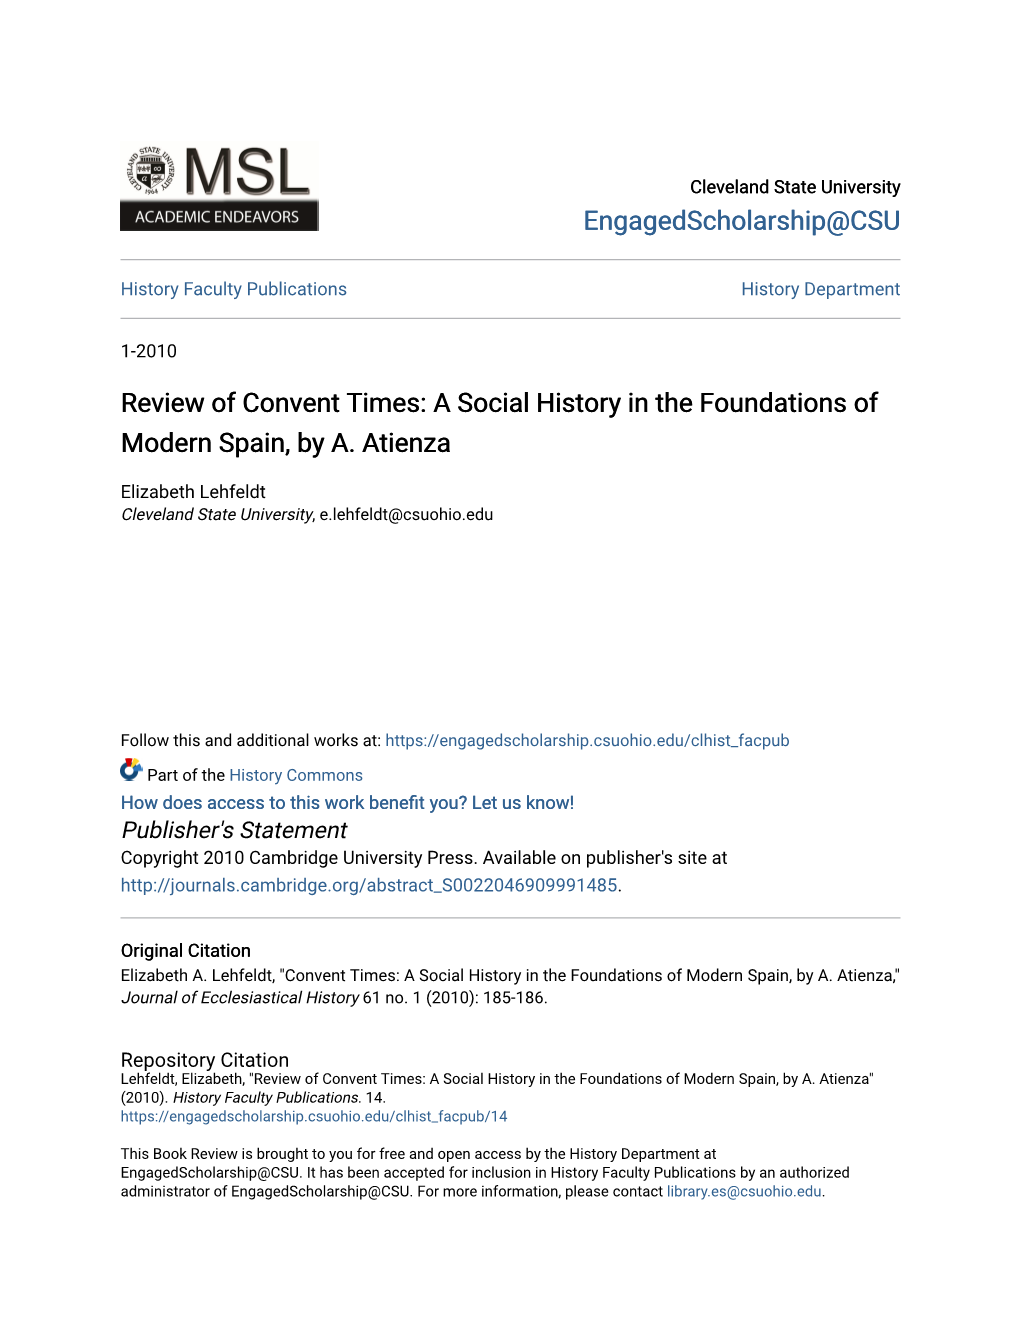 Review of Convent Times: a Social History in the Foundations of Modern Spain, by A